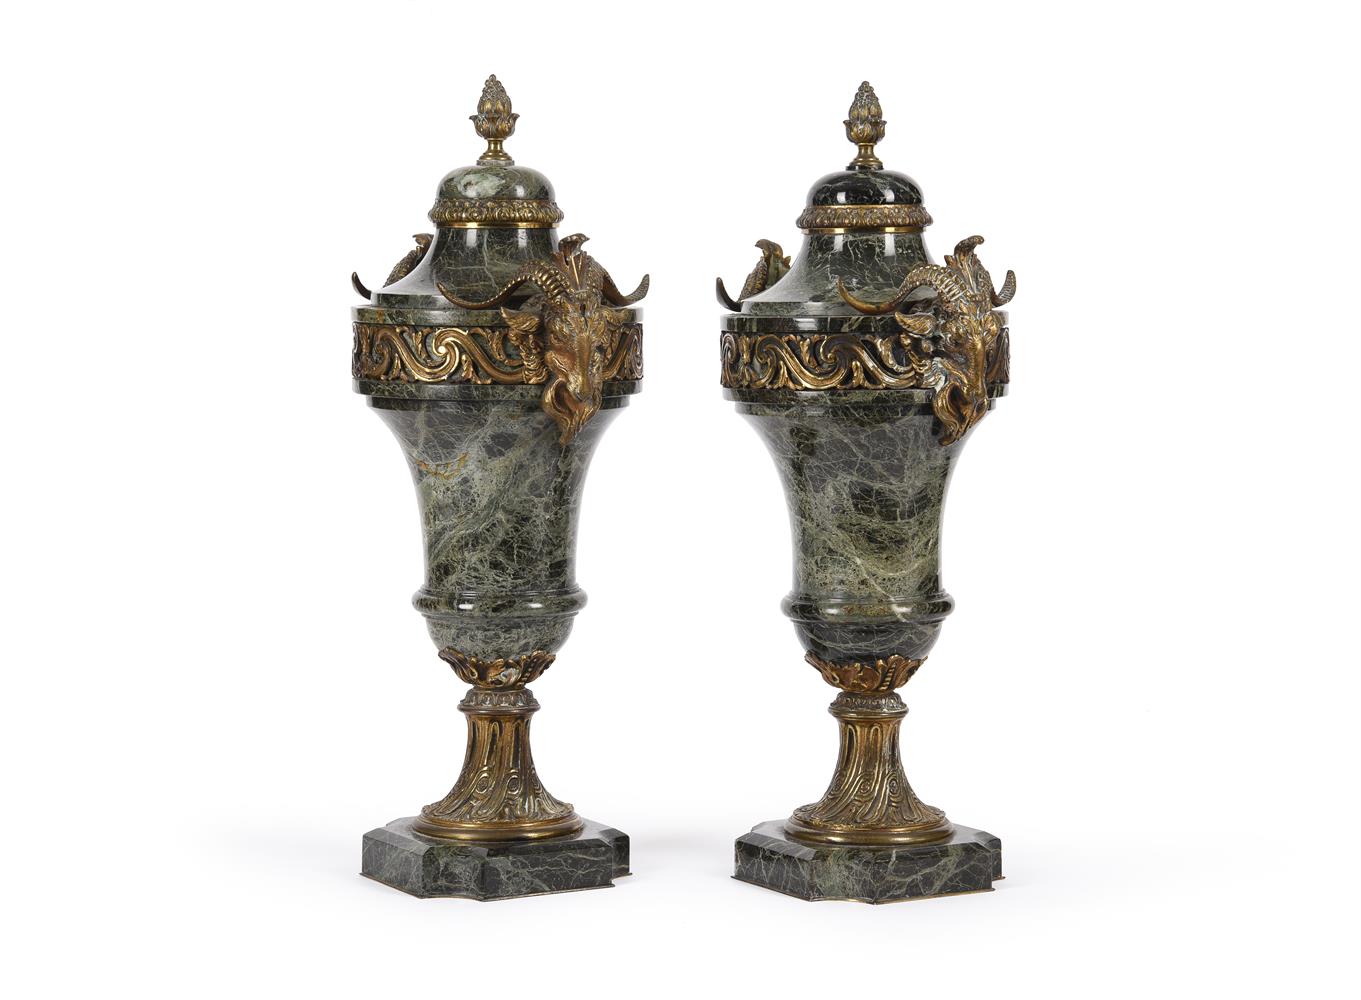 A PAIR OF SERPENTINE MARBLE AND GILT METAL MOUNTED URNS, FRENCH, LATE 19TH CENTURY